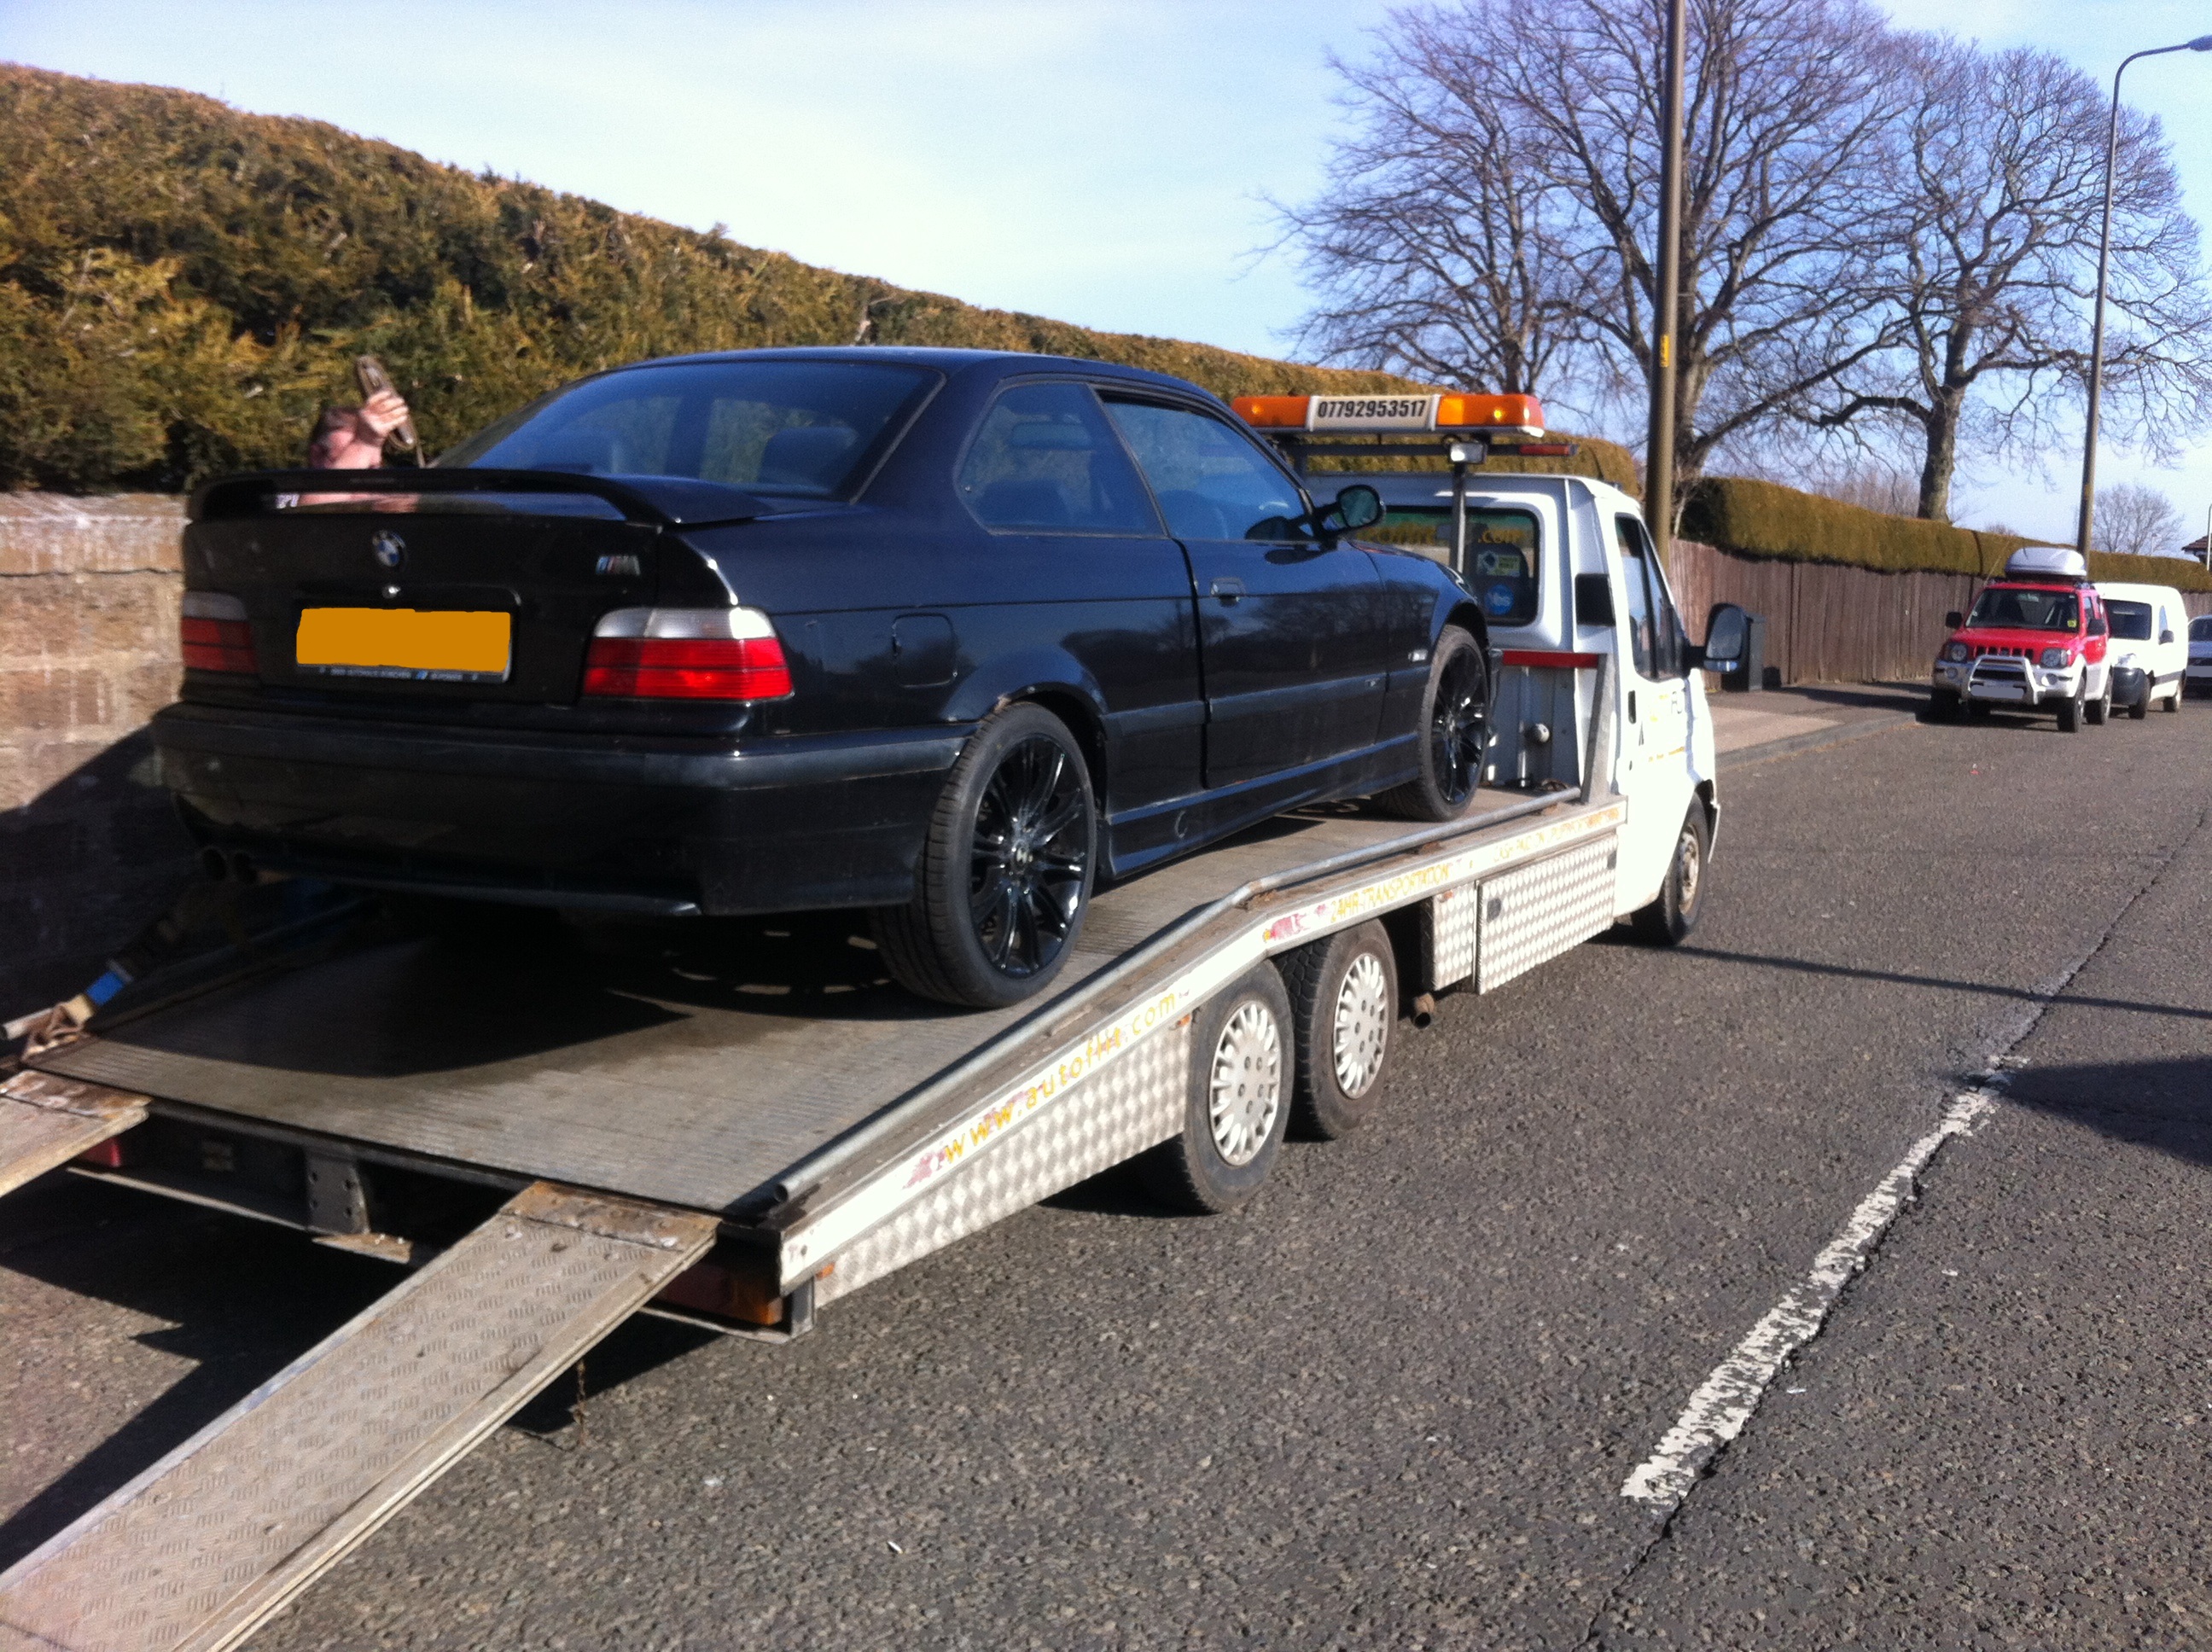 BMW M3 on the back of the Autoflit transporter